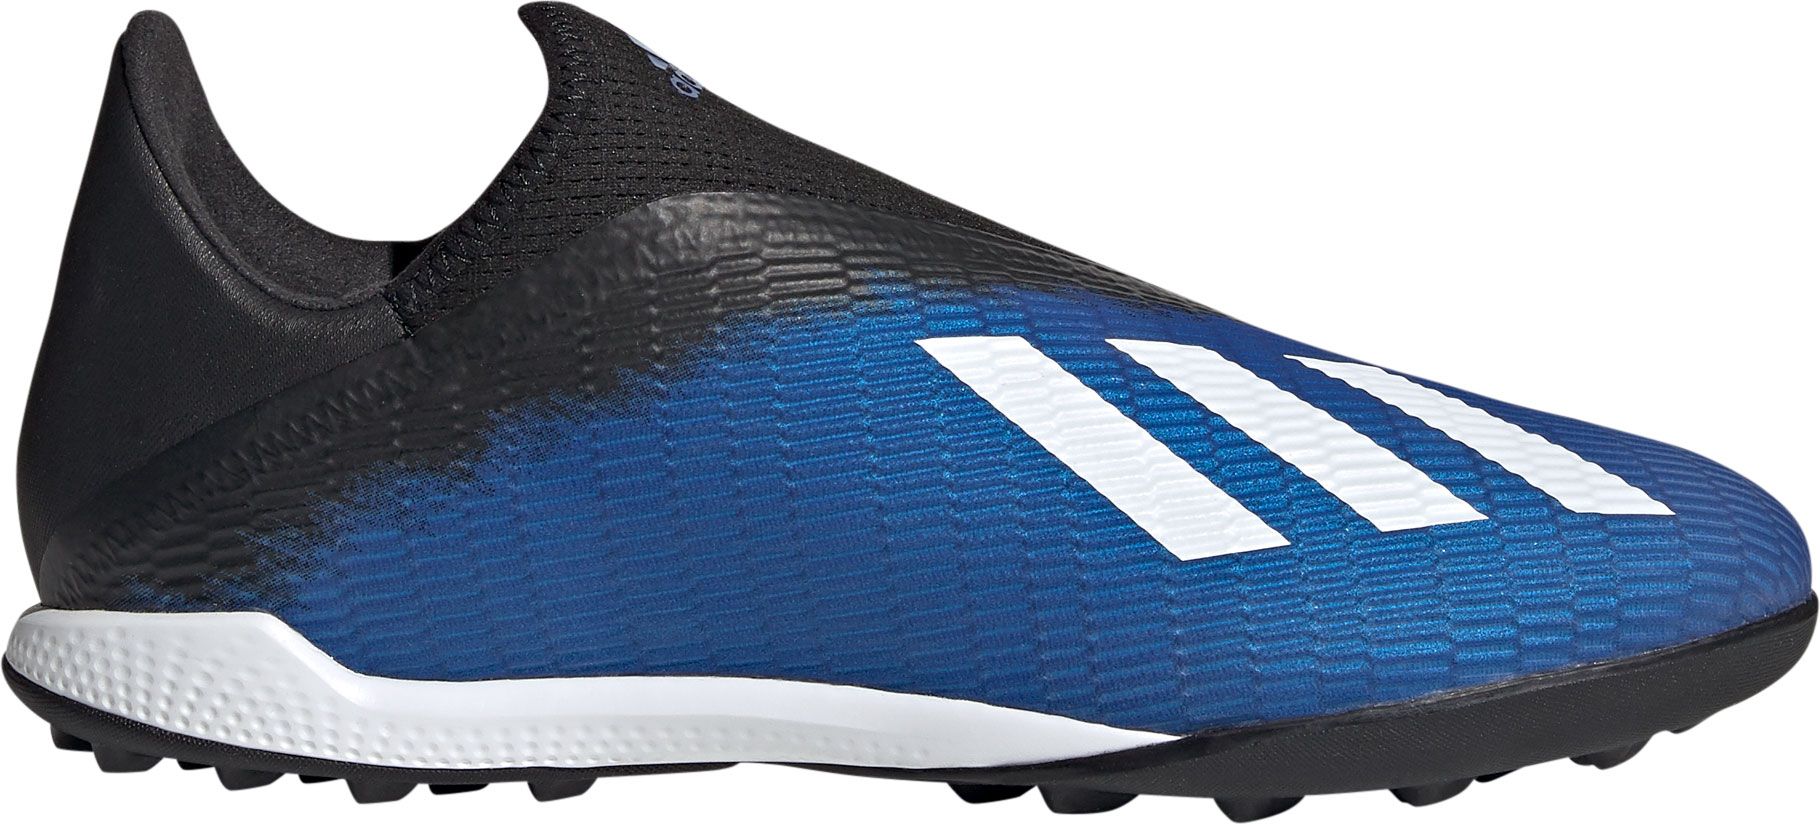 X 19.3 Laceless Turf Soccer Cleats 